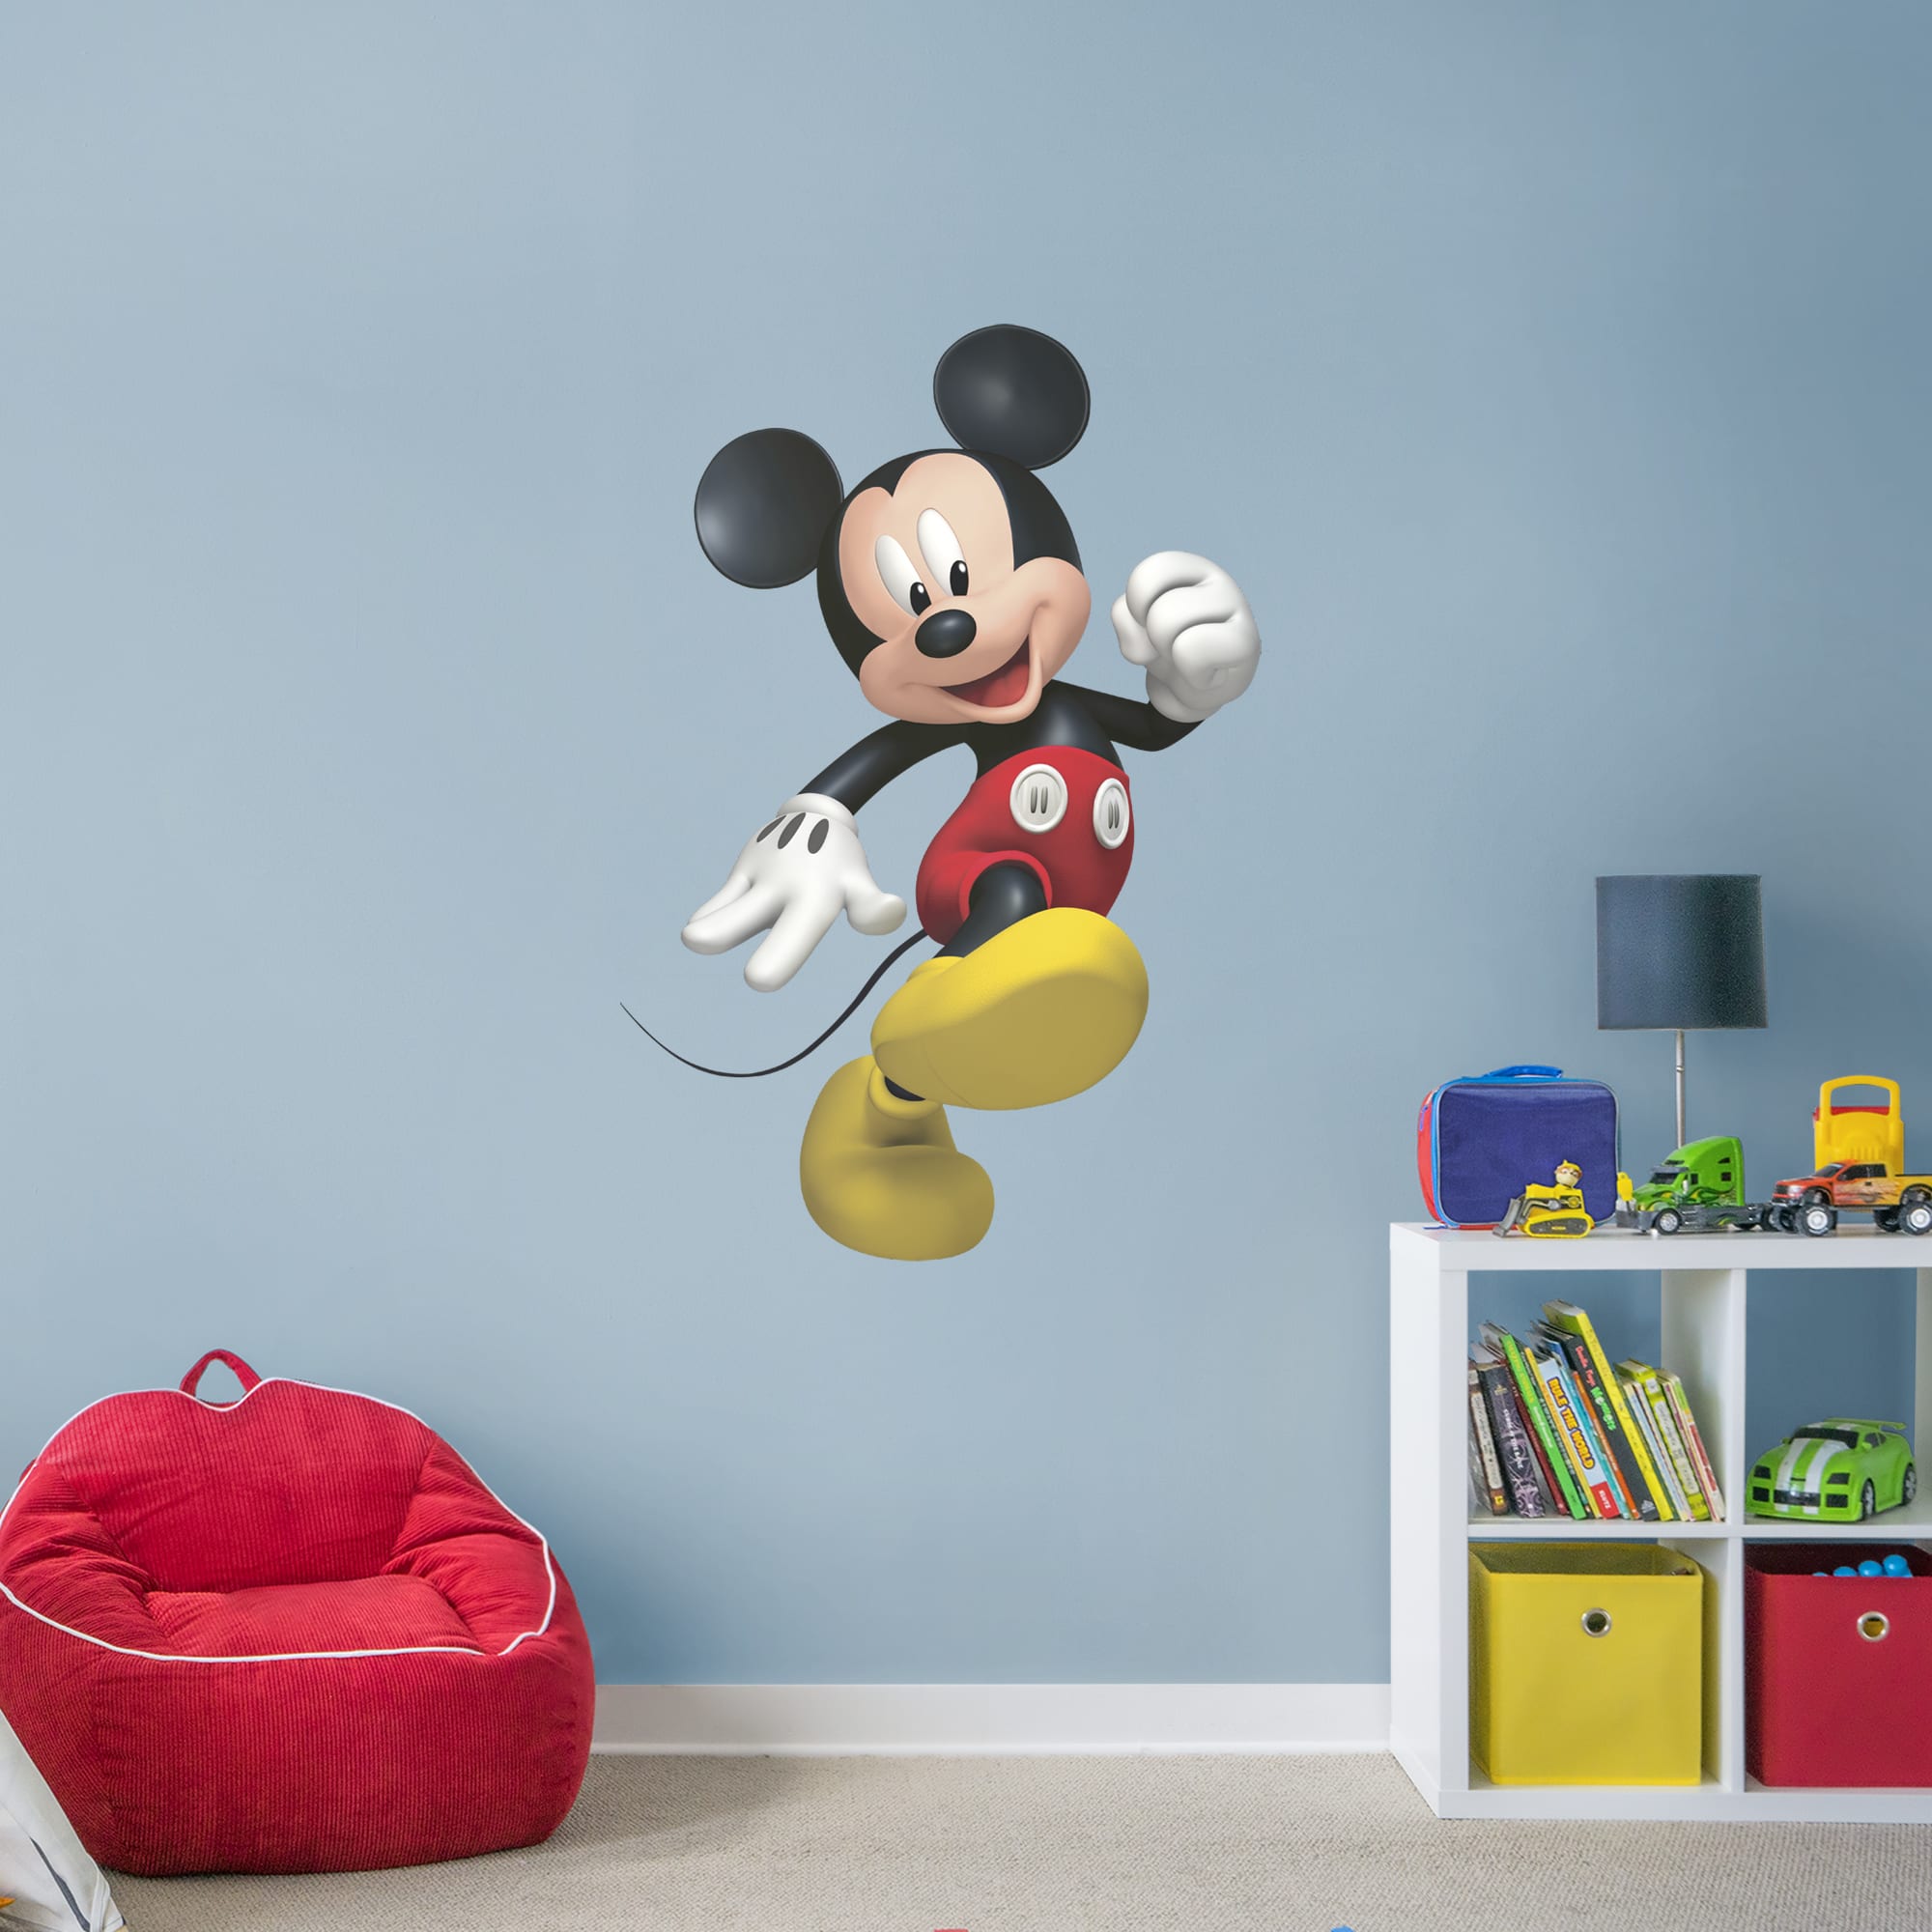 Mickey Mouse - Officially Licensed Disney Removable Wall Decal Giant Character + 2 Decals (35"W x 51"H) by Fathead | Vinyl